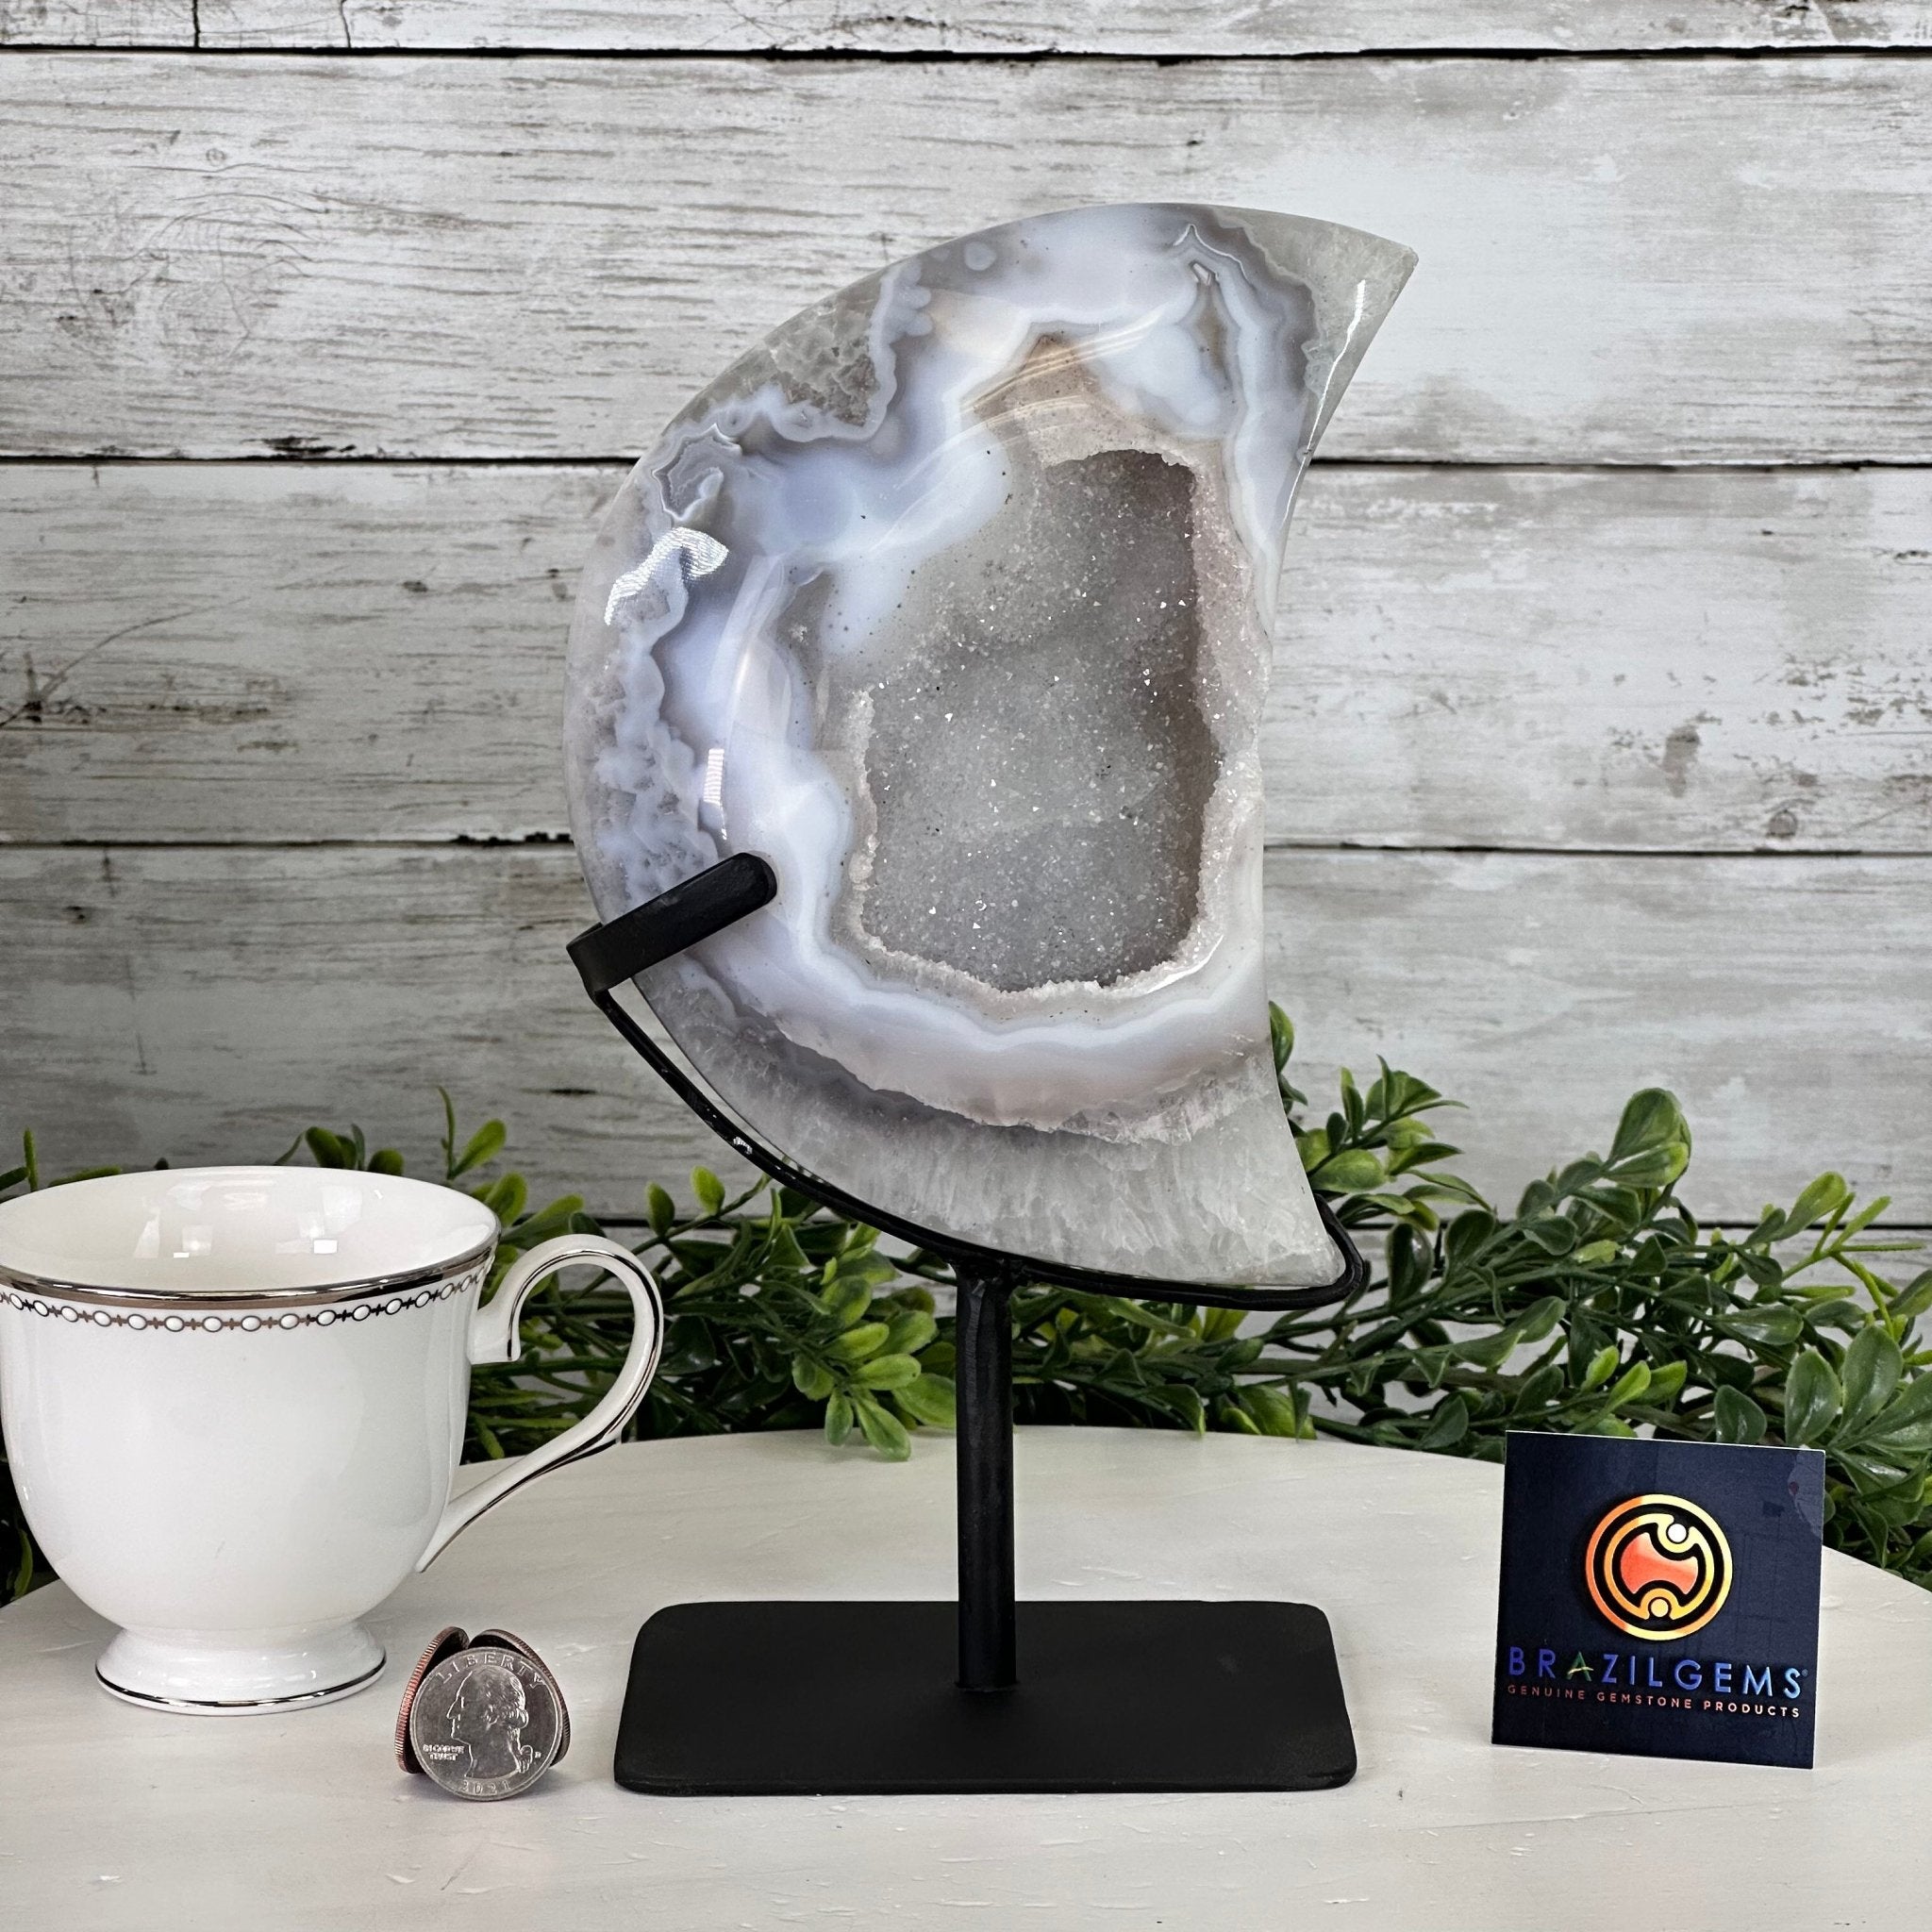 Polished Agate Crescent Moon on a Stand, 5.3 lbs & 9.8" Tall #5740NA-010 by Brazil Gems - Brazil GemsBrazil GemsPolished Agate Crescent Moon on a Stand, 5.3 lbs & 9.8" Tall #5740NA-010 by Brazil GemsCrescent Moons5740NA-010